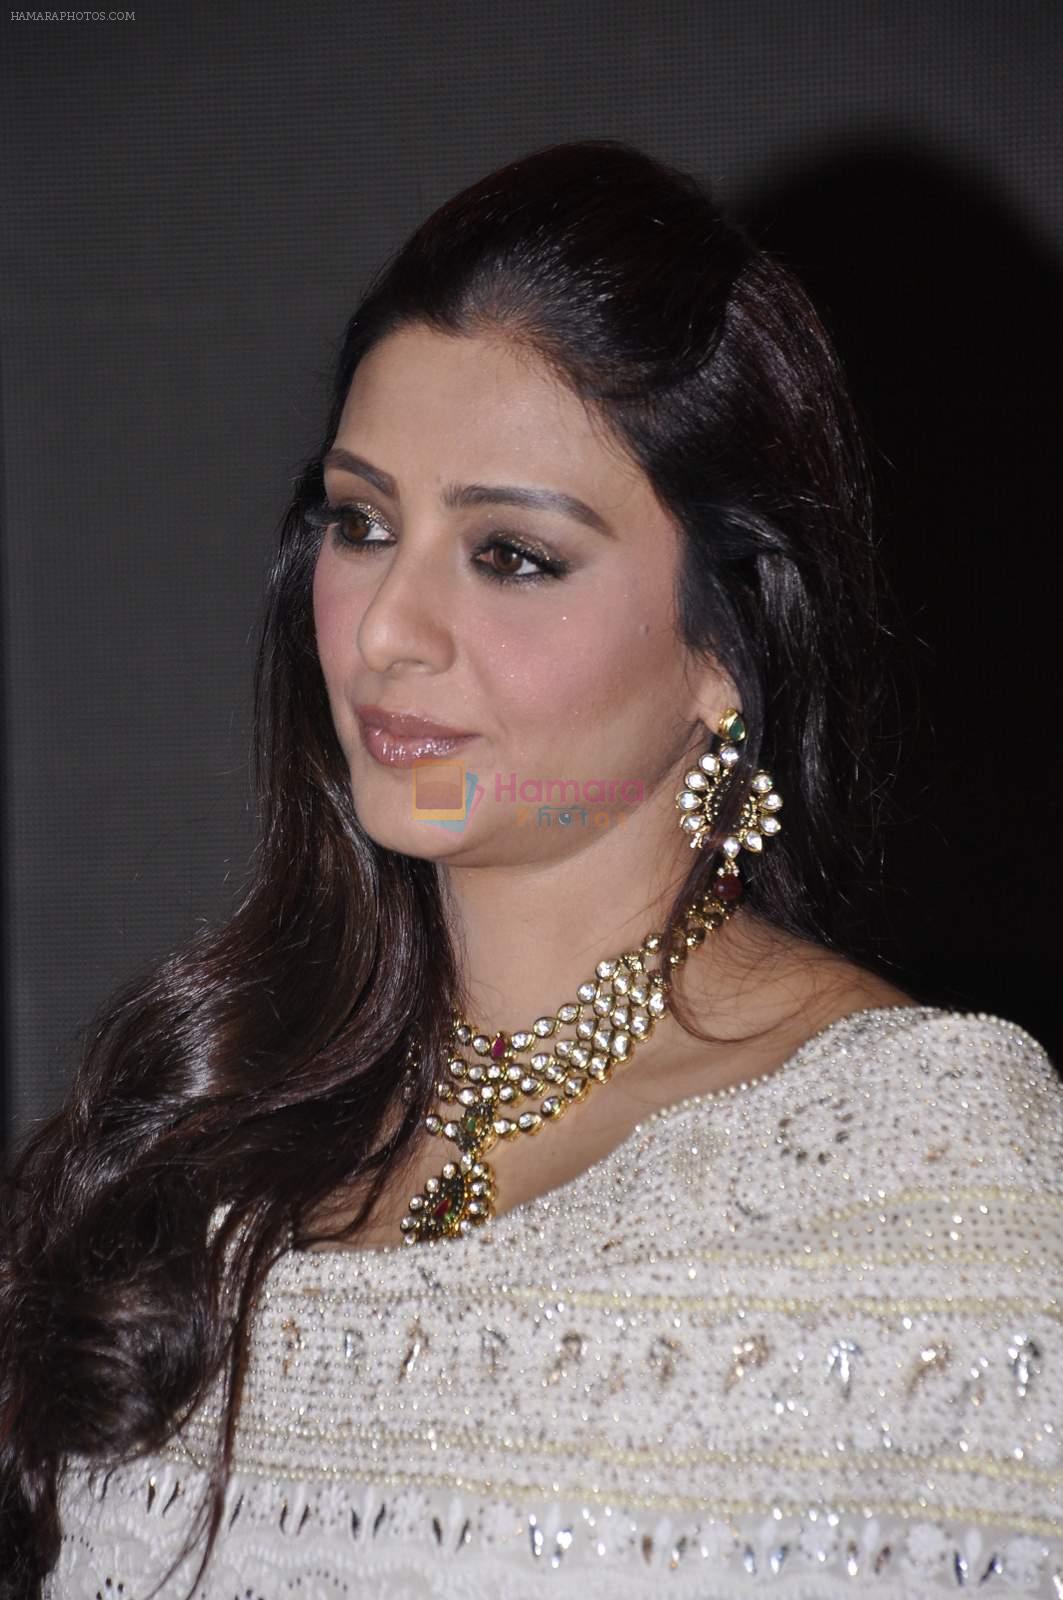 Tabu at jewelsouk launch in Mumbai on 28th Oct 2015